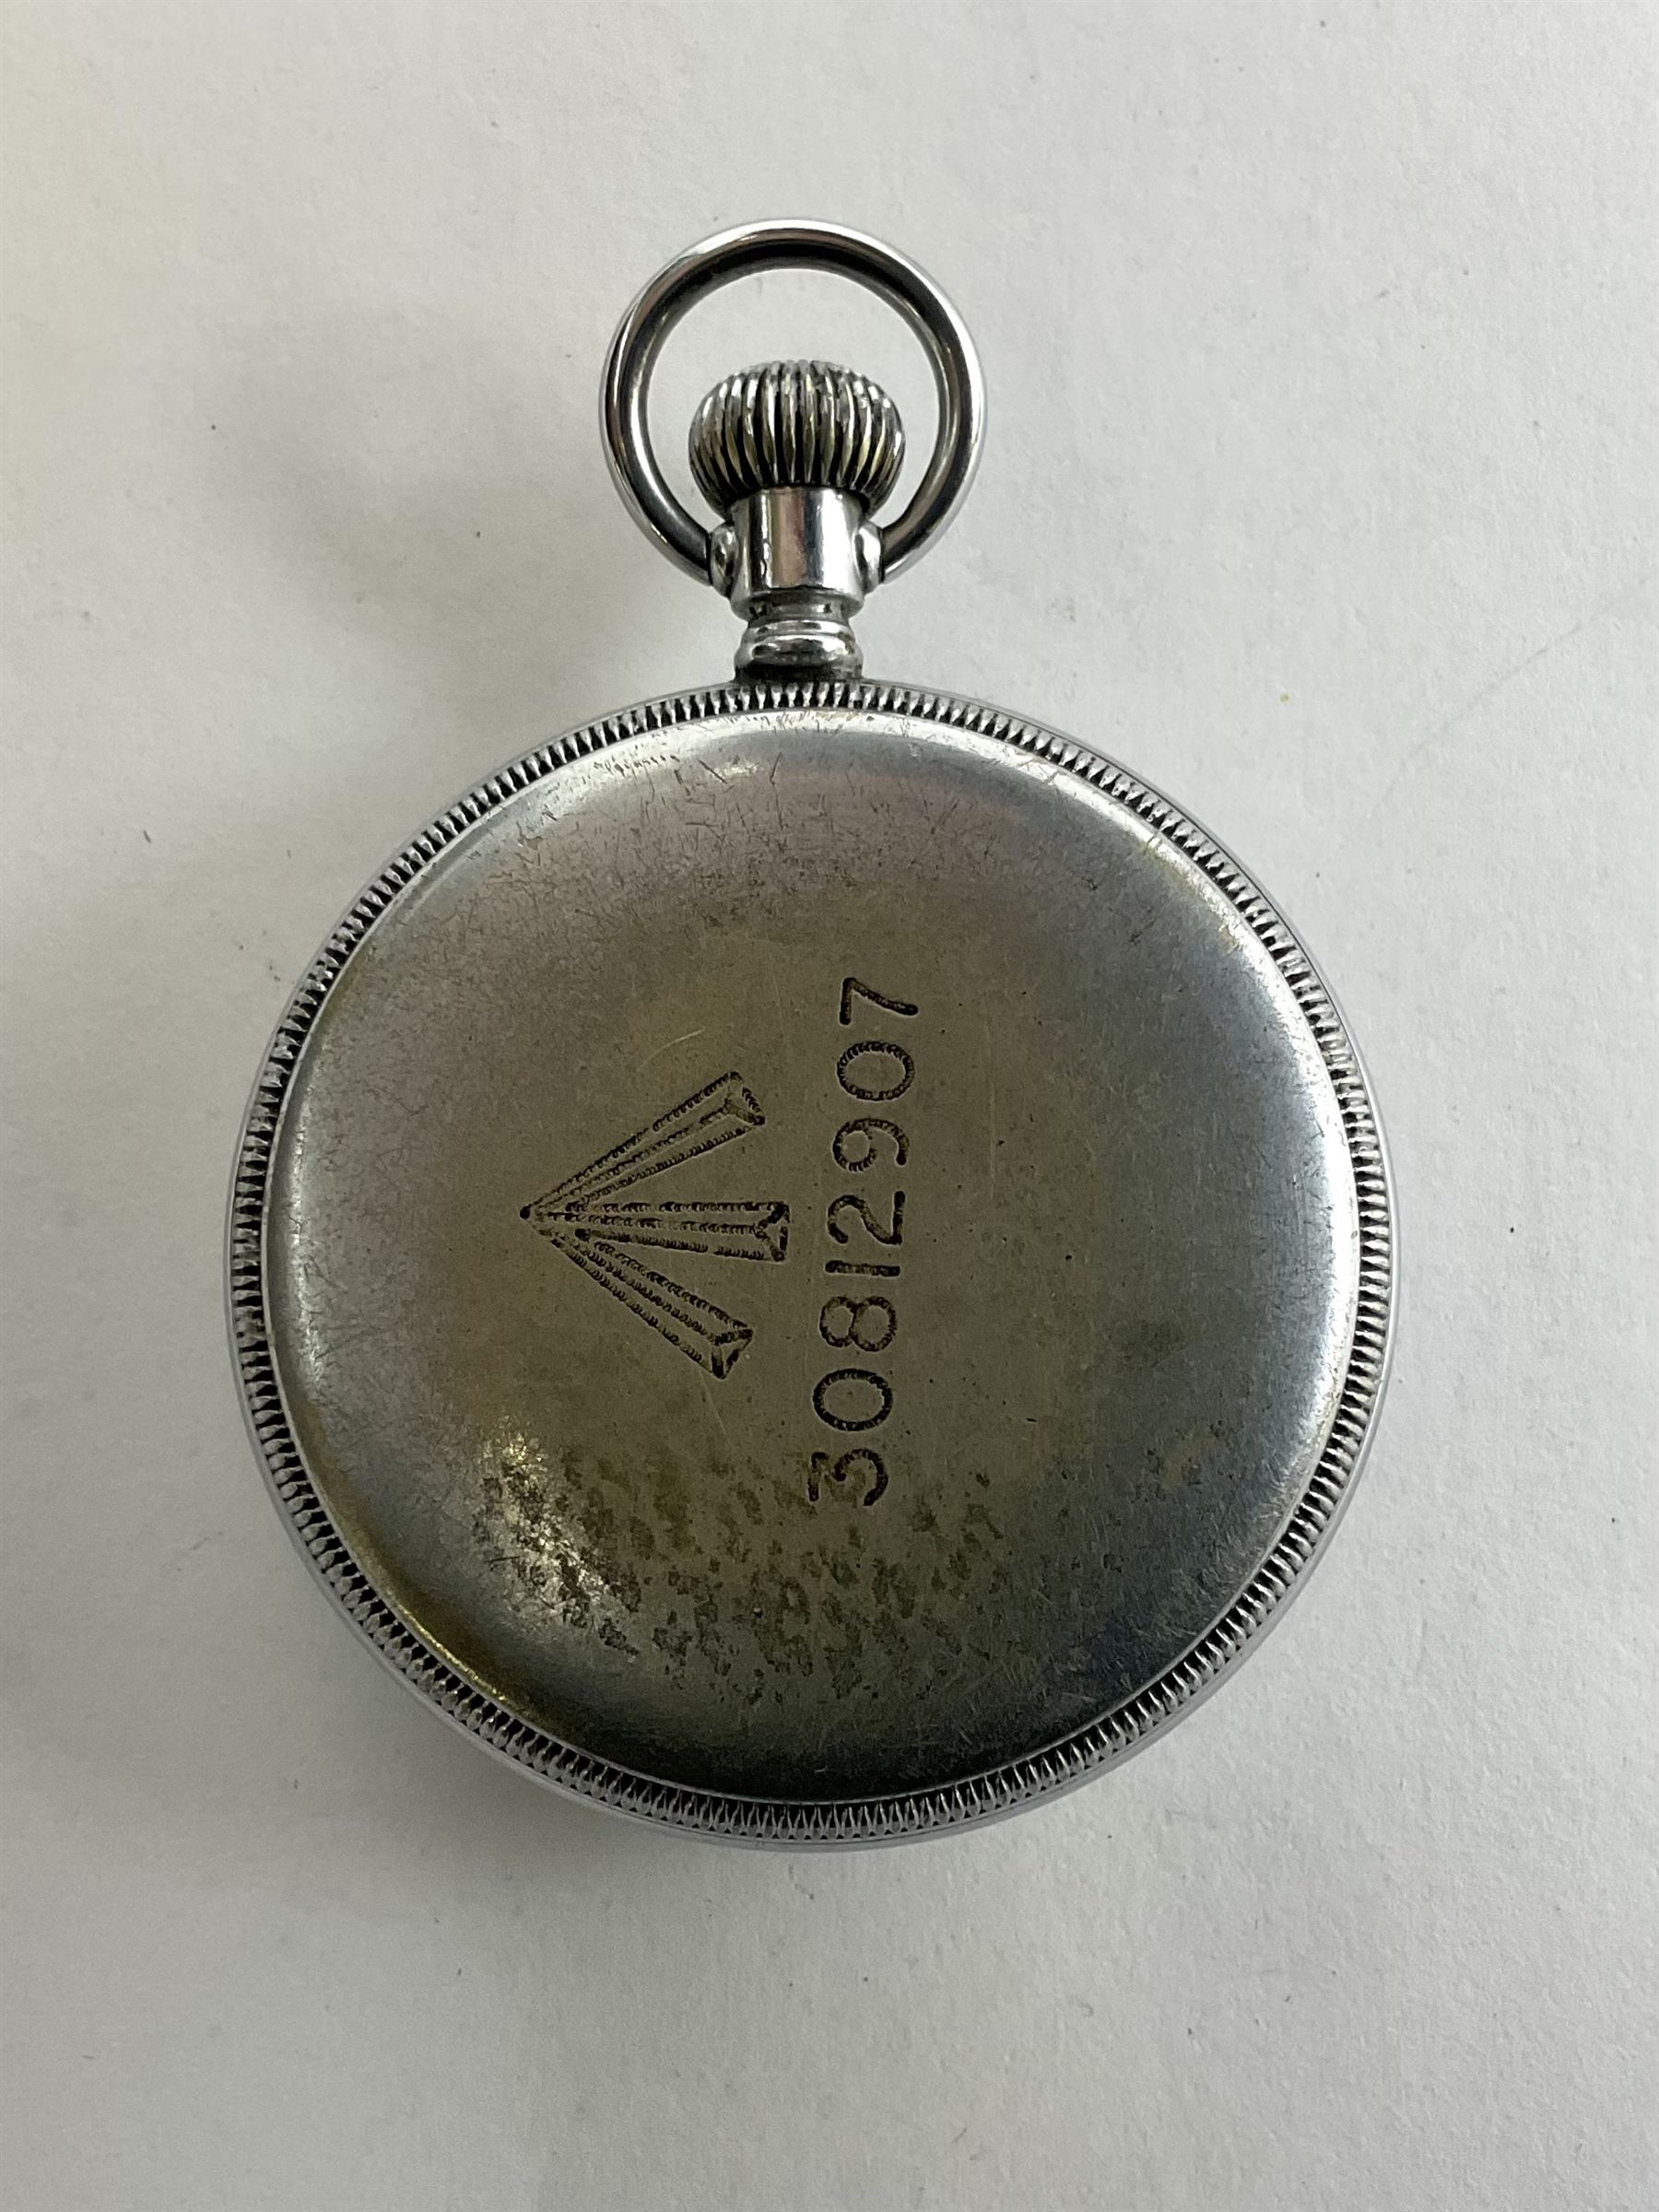 Waltham military open face pocket watch - Image 3 of 3